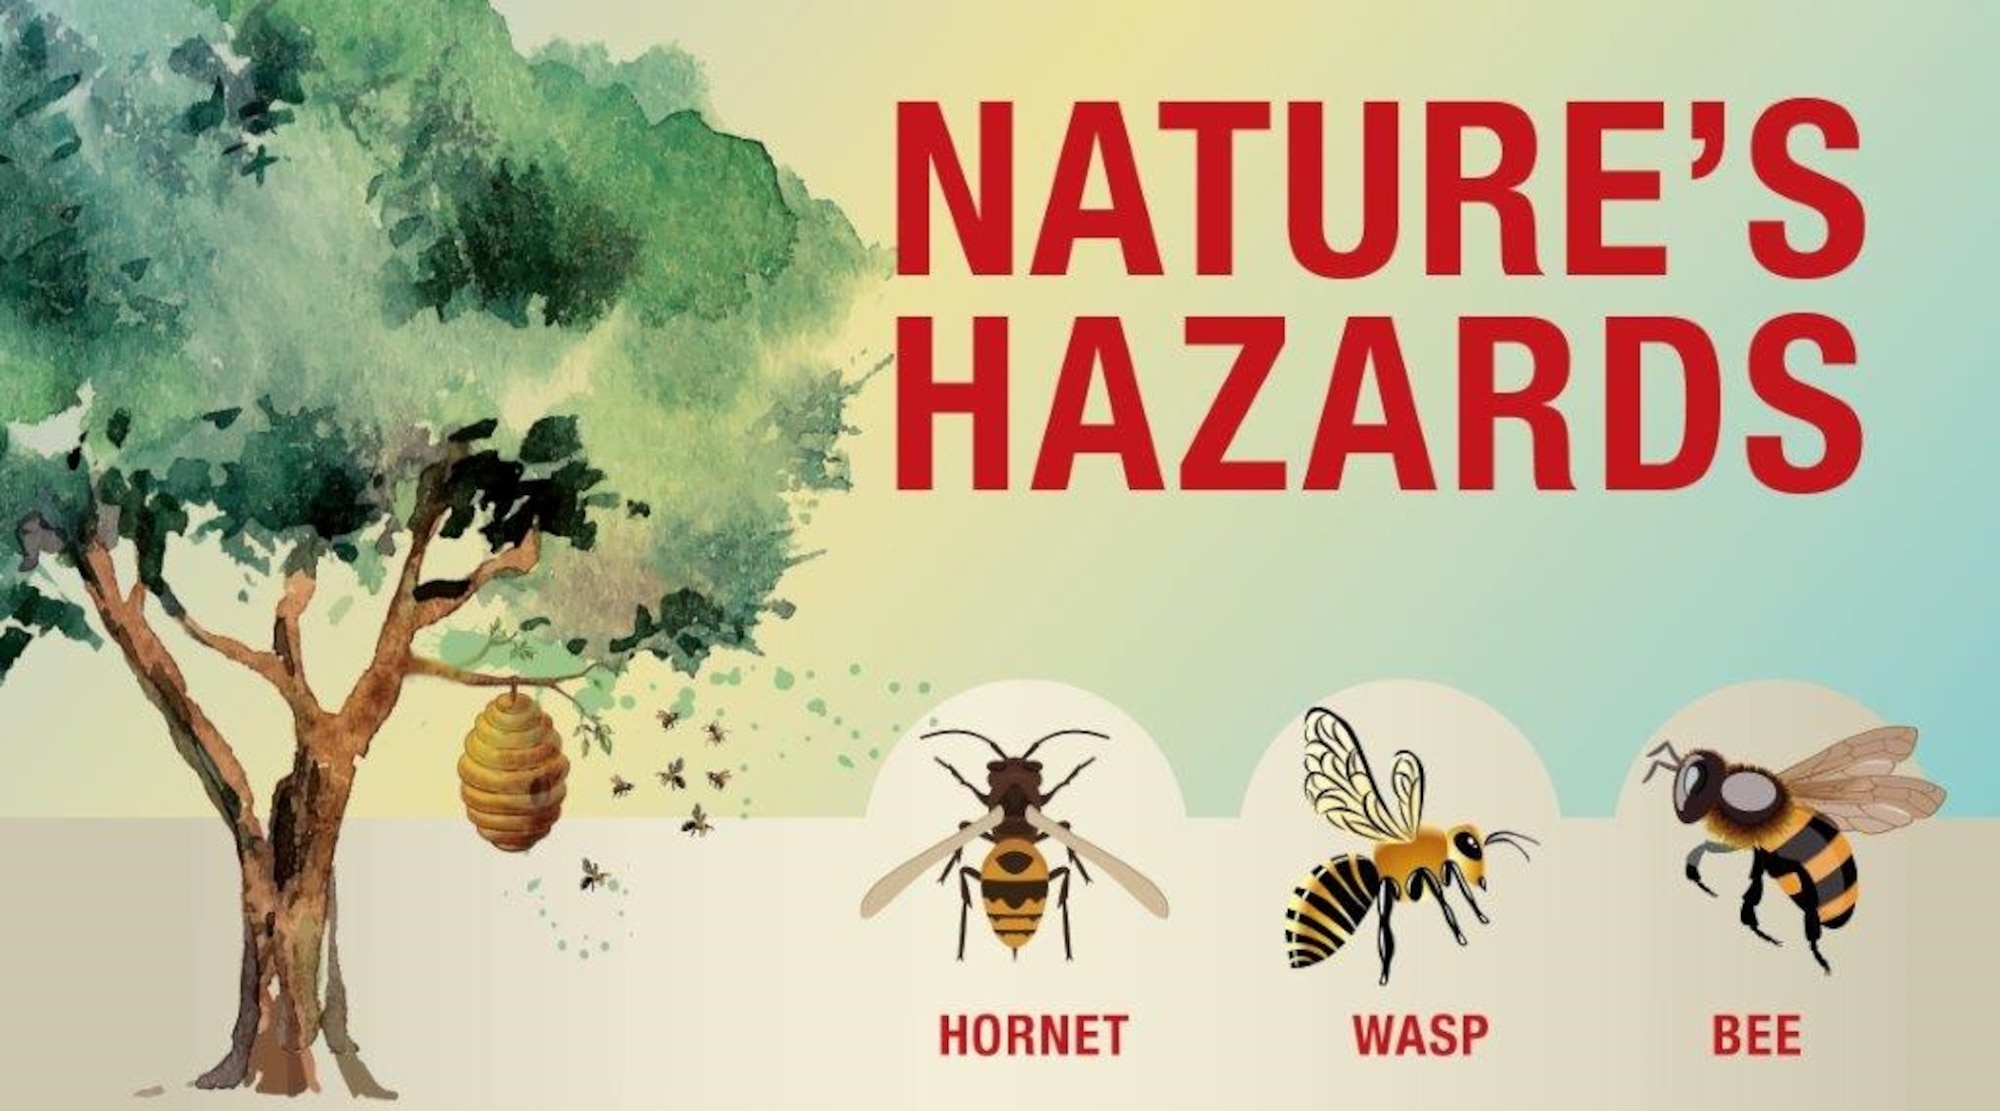 Nature's Hazards: Hornets, wasps and bees